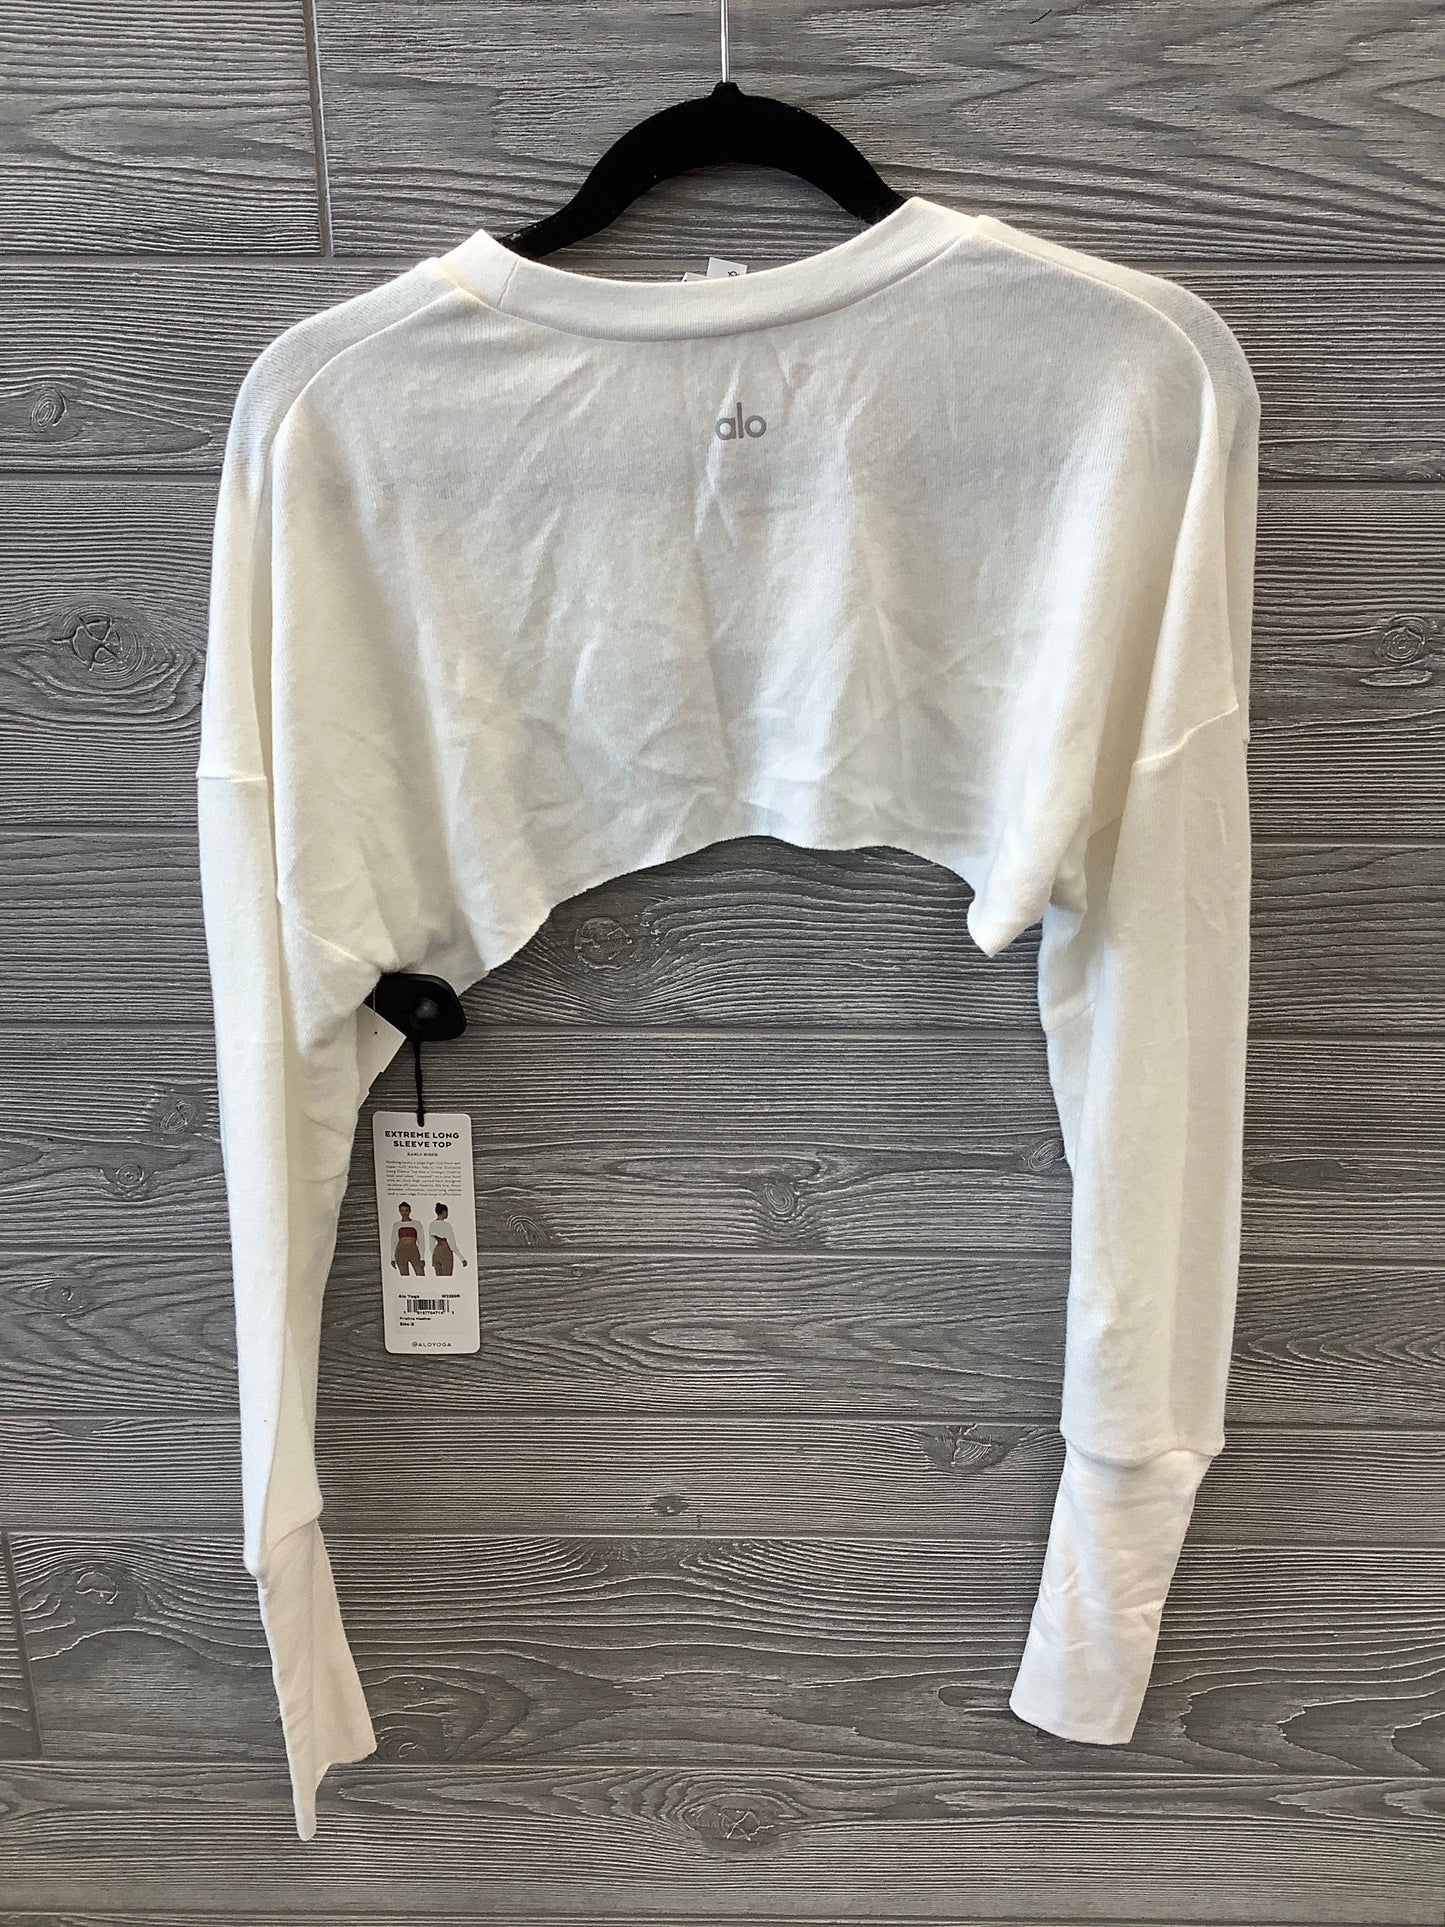 White Top Long Sleeve Alo, Size S